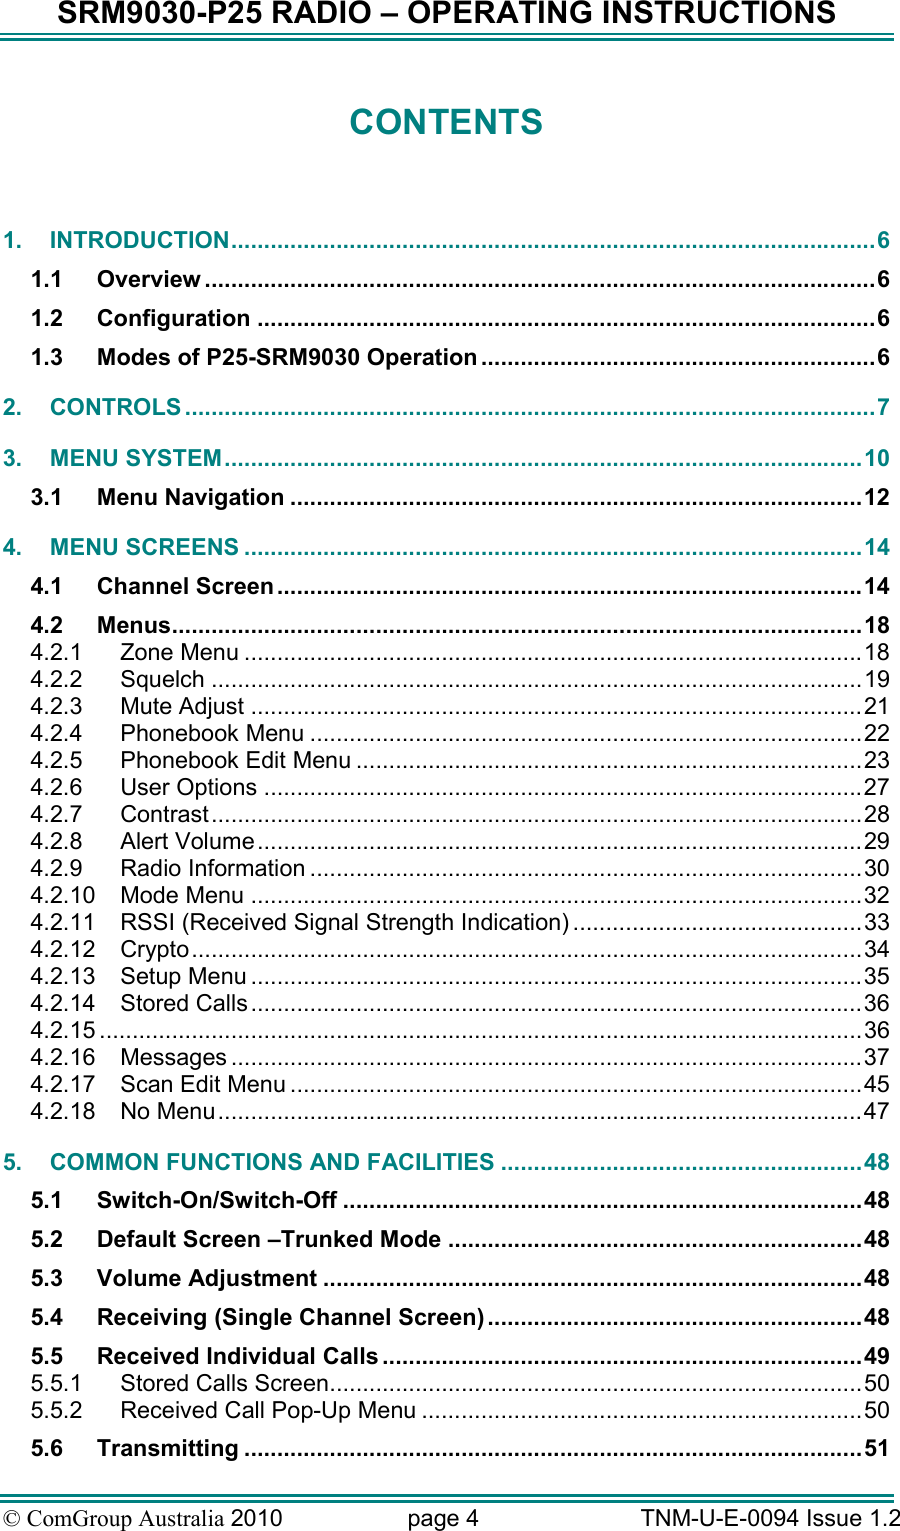 SRM9030-P25 RADIO – OPERATING INSTRUCTIONS © ComGroup Australia 2010  page 4   TNM-U-E-0094 Issue 1.2 CONTENTS   1. INTRODUCTION..................................................................................................6 1.1 Overview ......................................................................................................6 1.2 Configuration ..............................................................................................6 1.3 Modes of P25-SRM9030 Operation ............................................................6 2. CONTROLS .........................................................................................................7 3. MENU SYSTEM.................................................................................................10 3.1 Menu Navigation .......................................................................................12 4. MENU SCREENS ..............................................................................................14 4.1 Channel Screen.........................................................................................14 4.2 Menus.........................................................................................................18 4.2.1 Zone Menu ..............................................................................................18 4.2.2 Squelch ...................................................................................................19 4.2.3 Mute Adjust .............................................................................................21 4.2.4 Phonebook Menu ....................................................................................22 4.2.5 Phonebook Edit Menu .............................................................................23 4.2.6 User Options ...........................................................................................27 4.2.7 Contrast...................................................................................................28 4.2.8 Alert Volume............................................................................................29 4.2.9 Radio Information ....................................................................................30 4.2.10 Mode Menu .............................................................................................32 4.2.11 RSSI (Received Signal Strength Indication) ............................................33 4.2.12 Crypto......................................................................................................34 4.2.13 Setup Menu .............................................................................................35 4.2.14 Stored Calls.............................................................................................36 4.2.15 ....................................................................................................................36 4.2.16 Messages ................................................................................................37 4.2.17 Scan Edit Menu .......................................................................................45 4.2.18 No Menu..................................................................................................47 5. COMMON FUNCTIONS AND FACILITIES .......................................................48 5.1 Switch-On/Switch-Off ...............................................................................48 5.2 Default Screen –Trunked Mode ...............................................................48 5.3 Volume Adjustment ..................................................................................48 5.4 Receiving (Single Channel Screen) .........................................................48 5.5 Received Individual Calls .........................................................................49 5.5.1 Stored Calls Screen.................................................................................50 5.5.2 Received Call Pop-Up Menu ...................................................................50 5.6 Transmitting ..............................................................................................51 